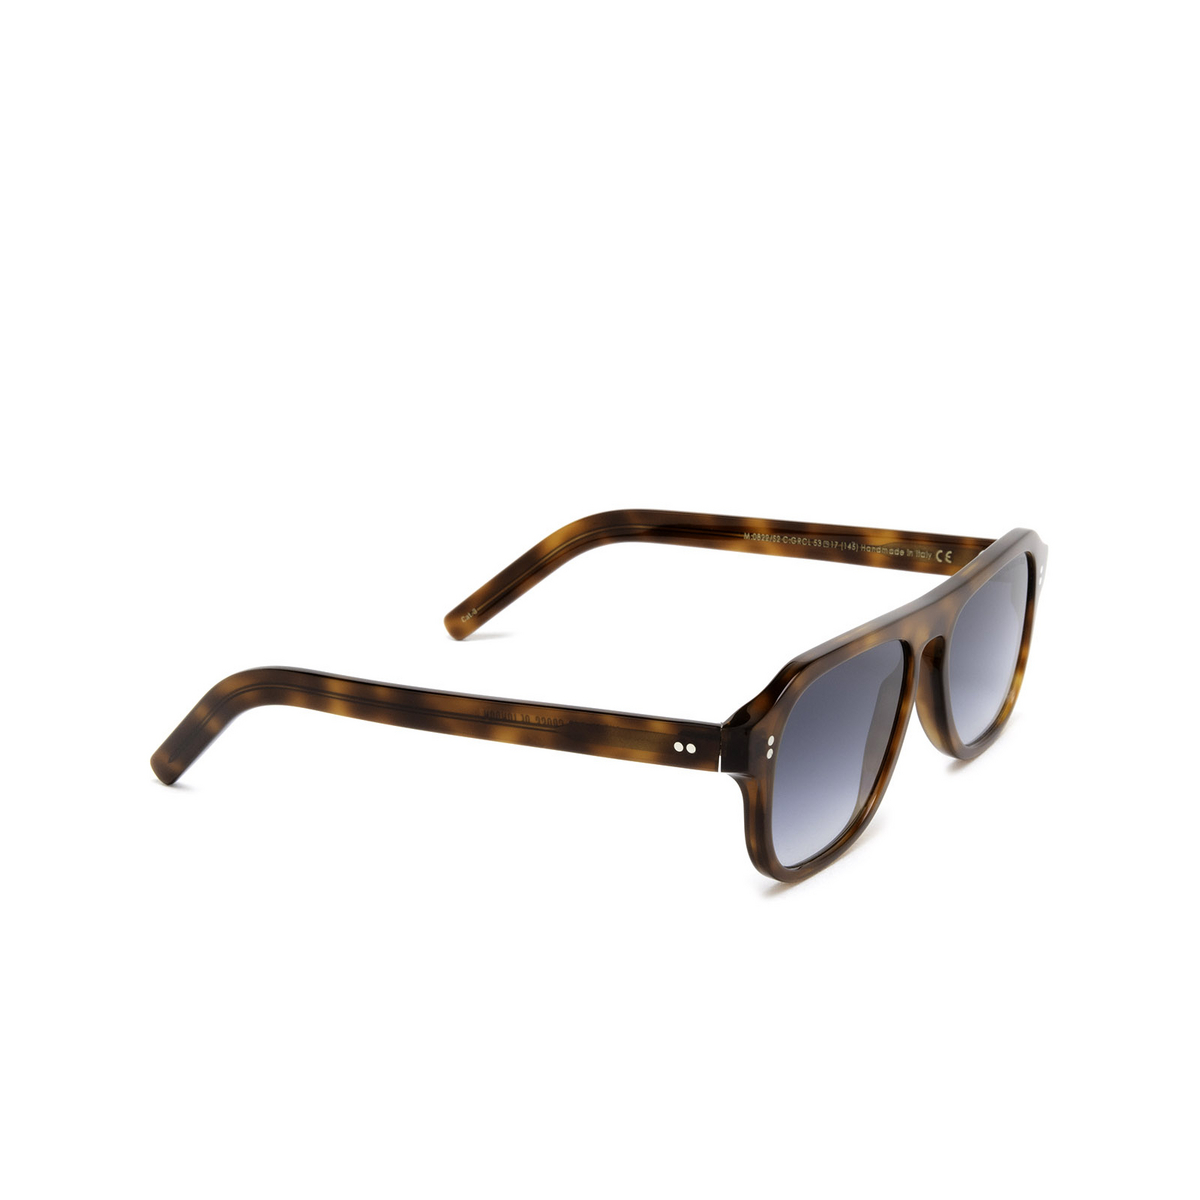 Cutler and Gross® Aviator Sunglasses: 0822/S2 SUN color Ground Cloves Grcl - three-quarters view.